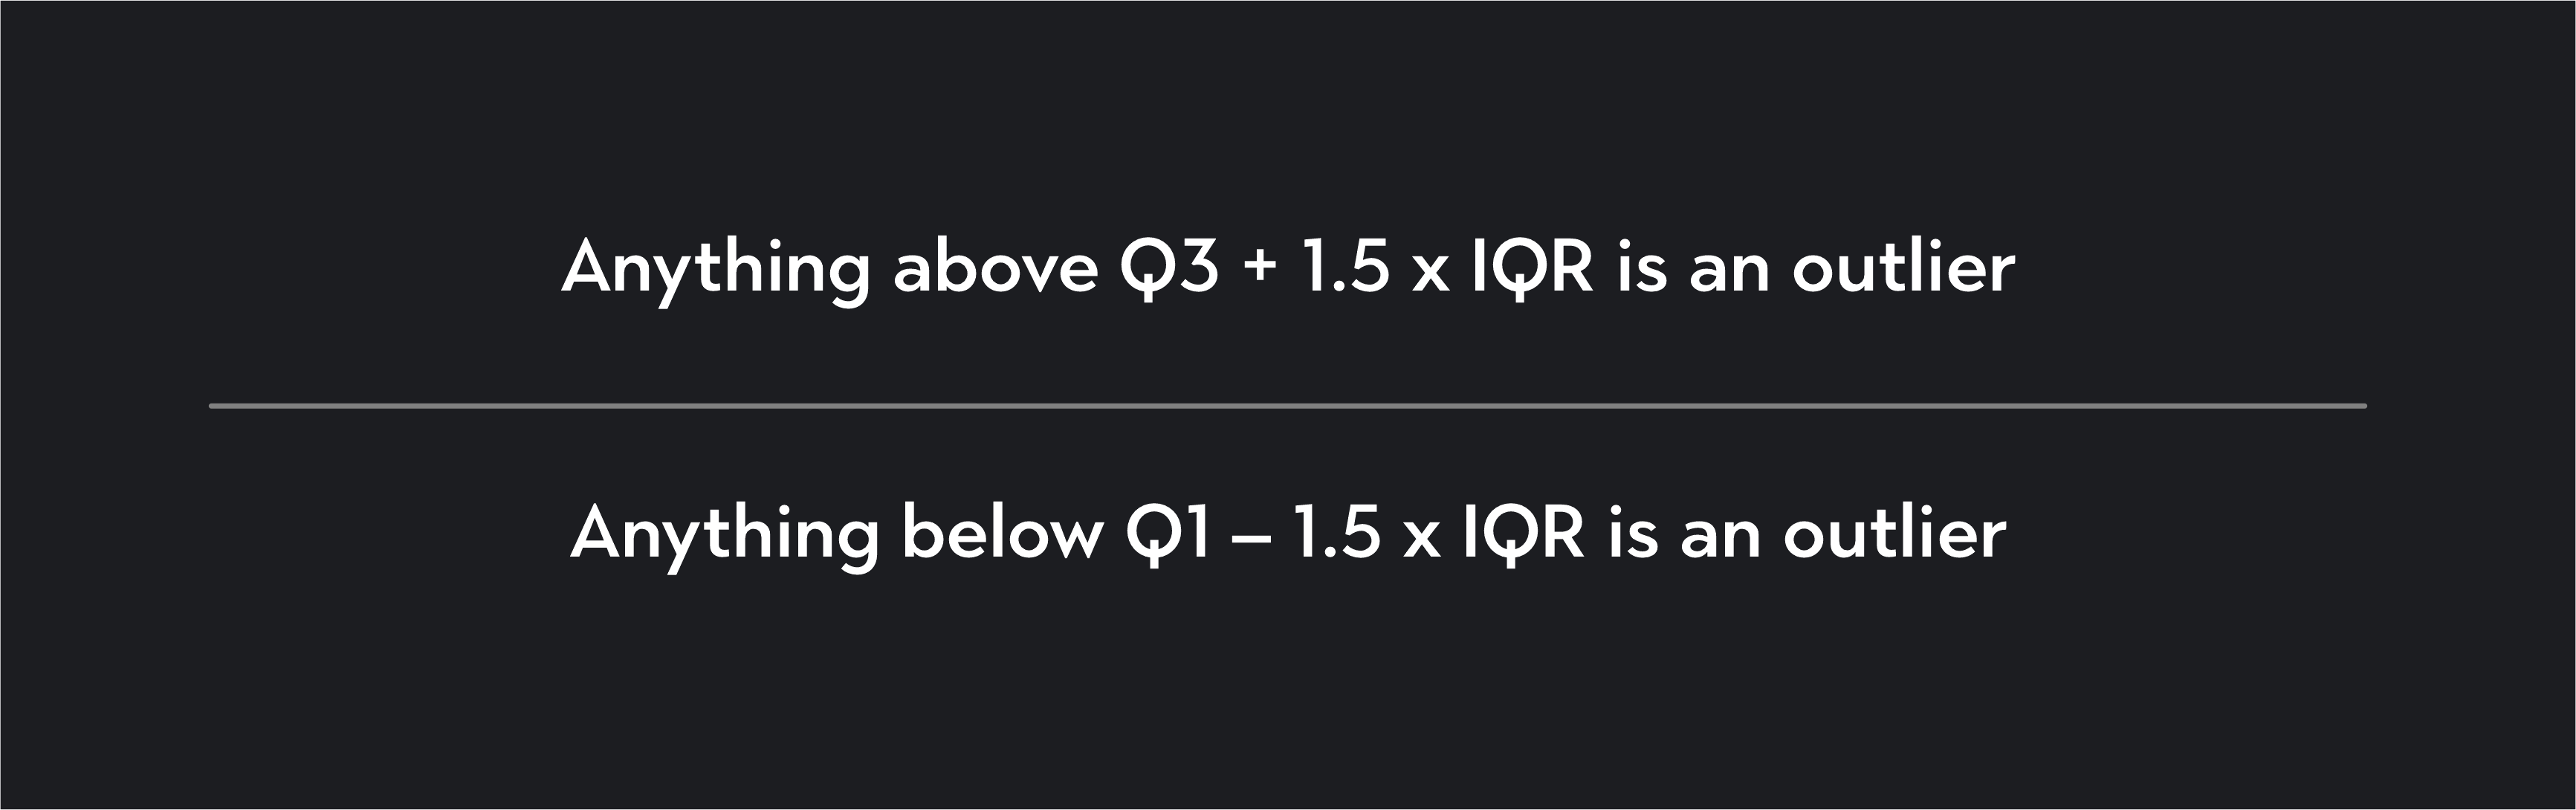 Text stating "Anything above Q3 + 1.5 x IQR is an outlier and anything below Q1-1.5 x IQR is an outlier